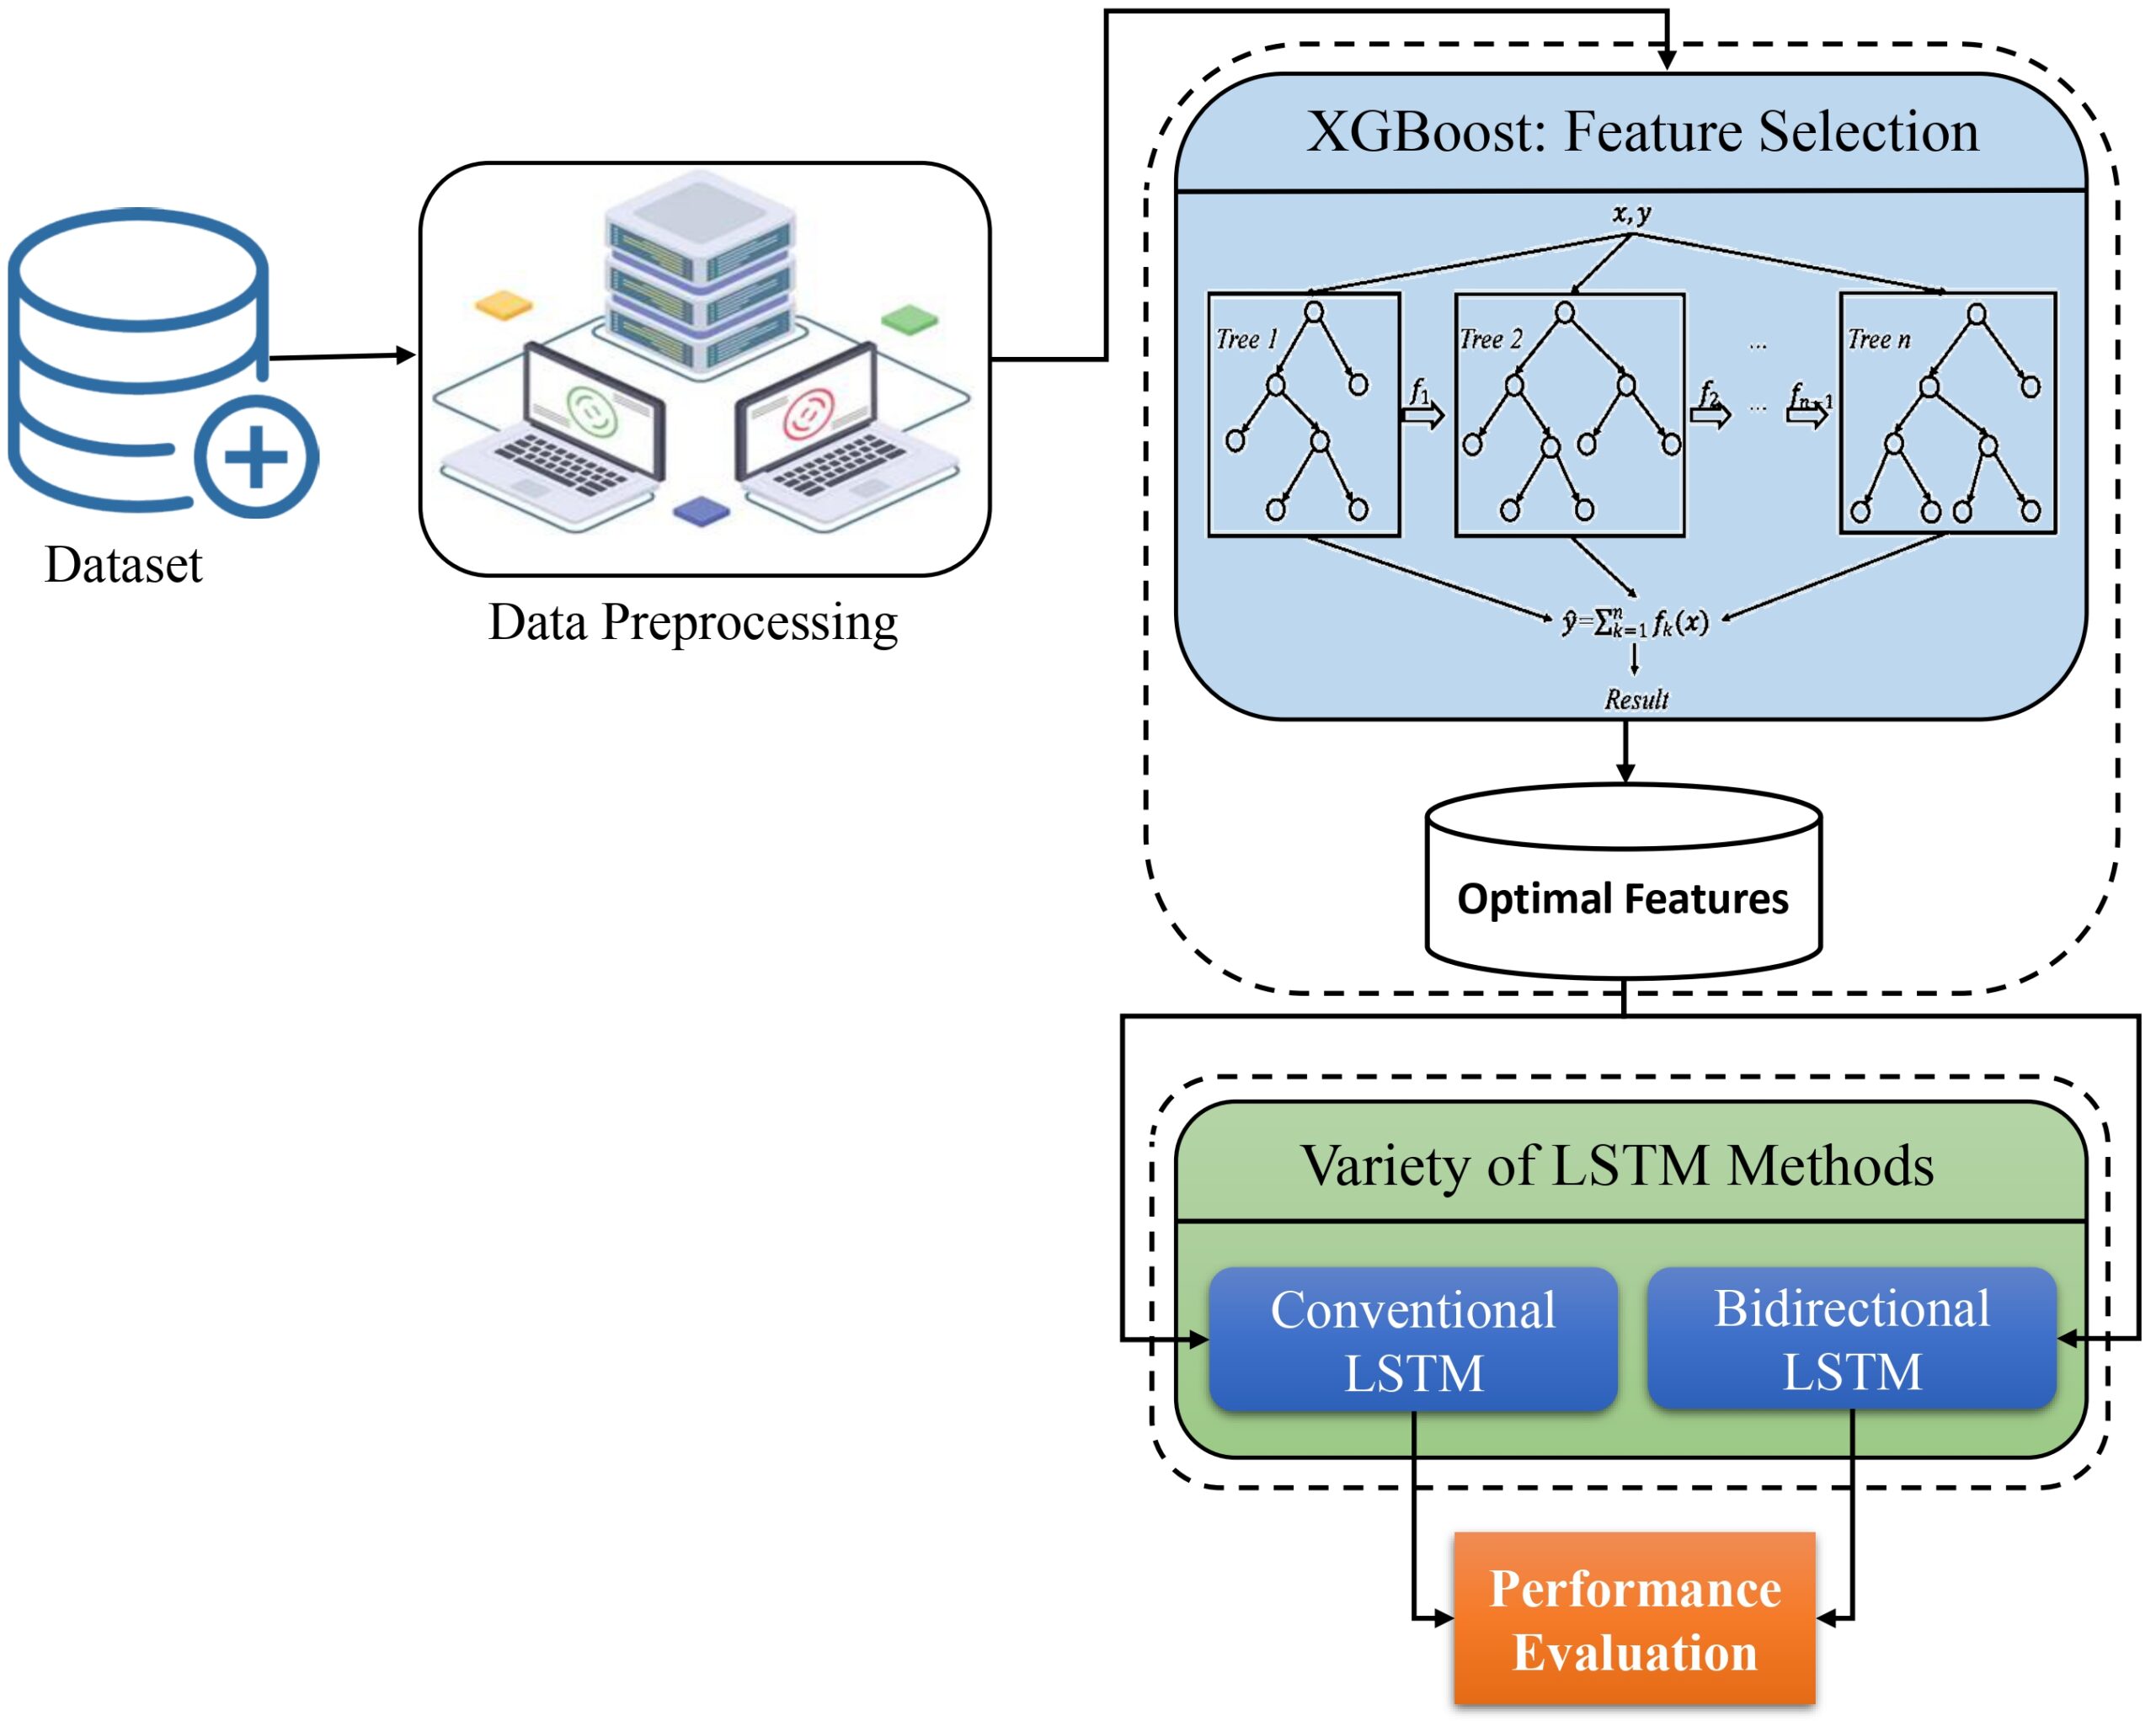 Predictive Power of XGBoost_BiLSTM Model: A Machine-LearningApproach for Accurate Sleep Apnea Detection Using Electronic HealthData